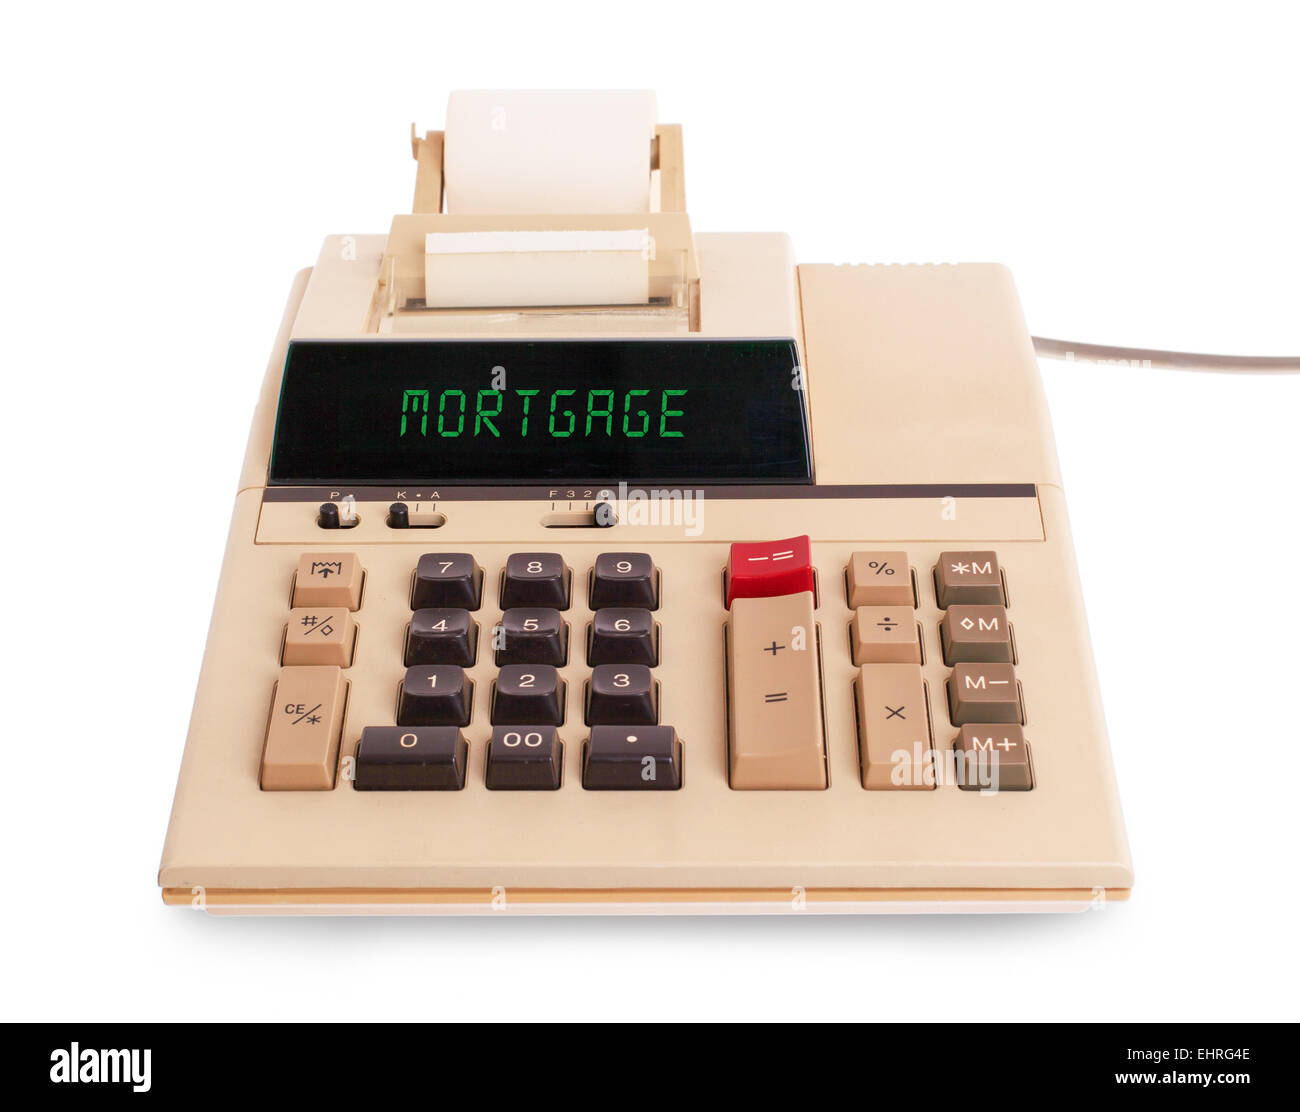 Old calculator showing a text on display - mortgage Stock Photo